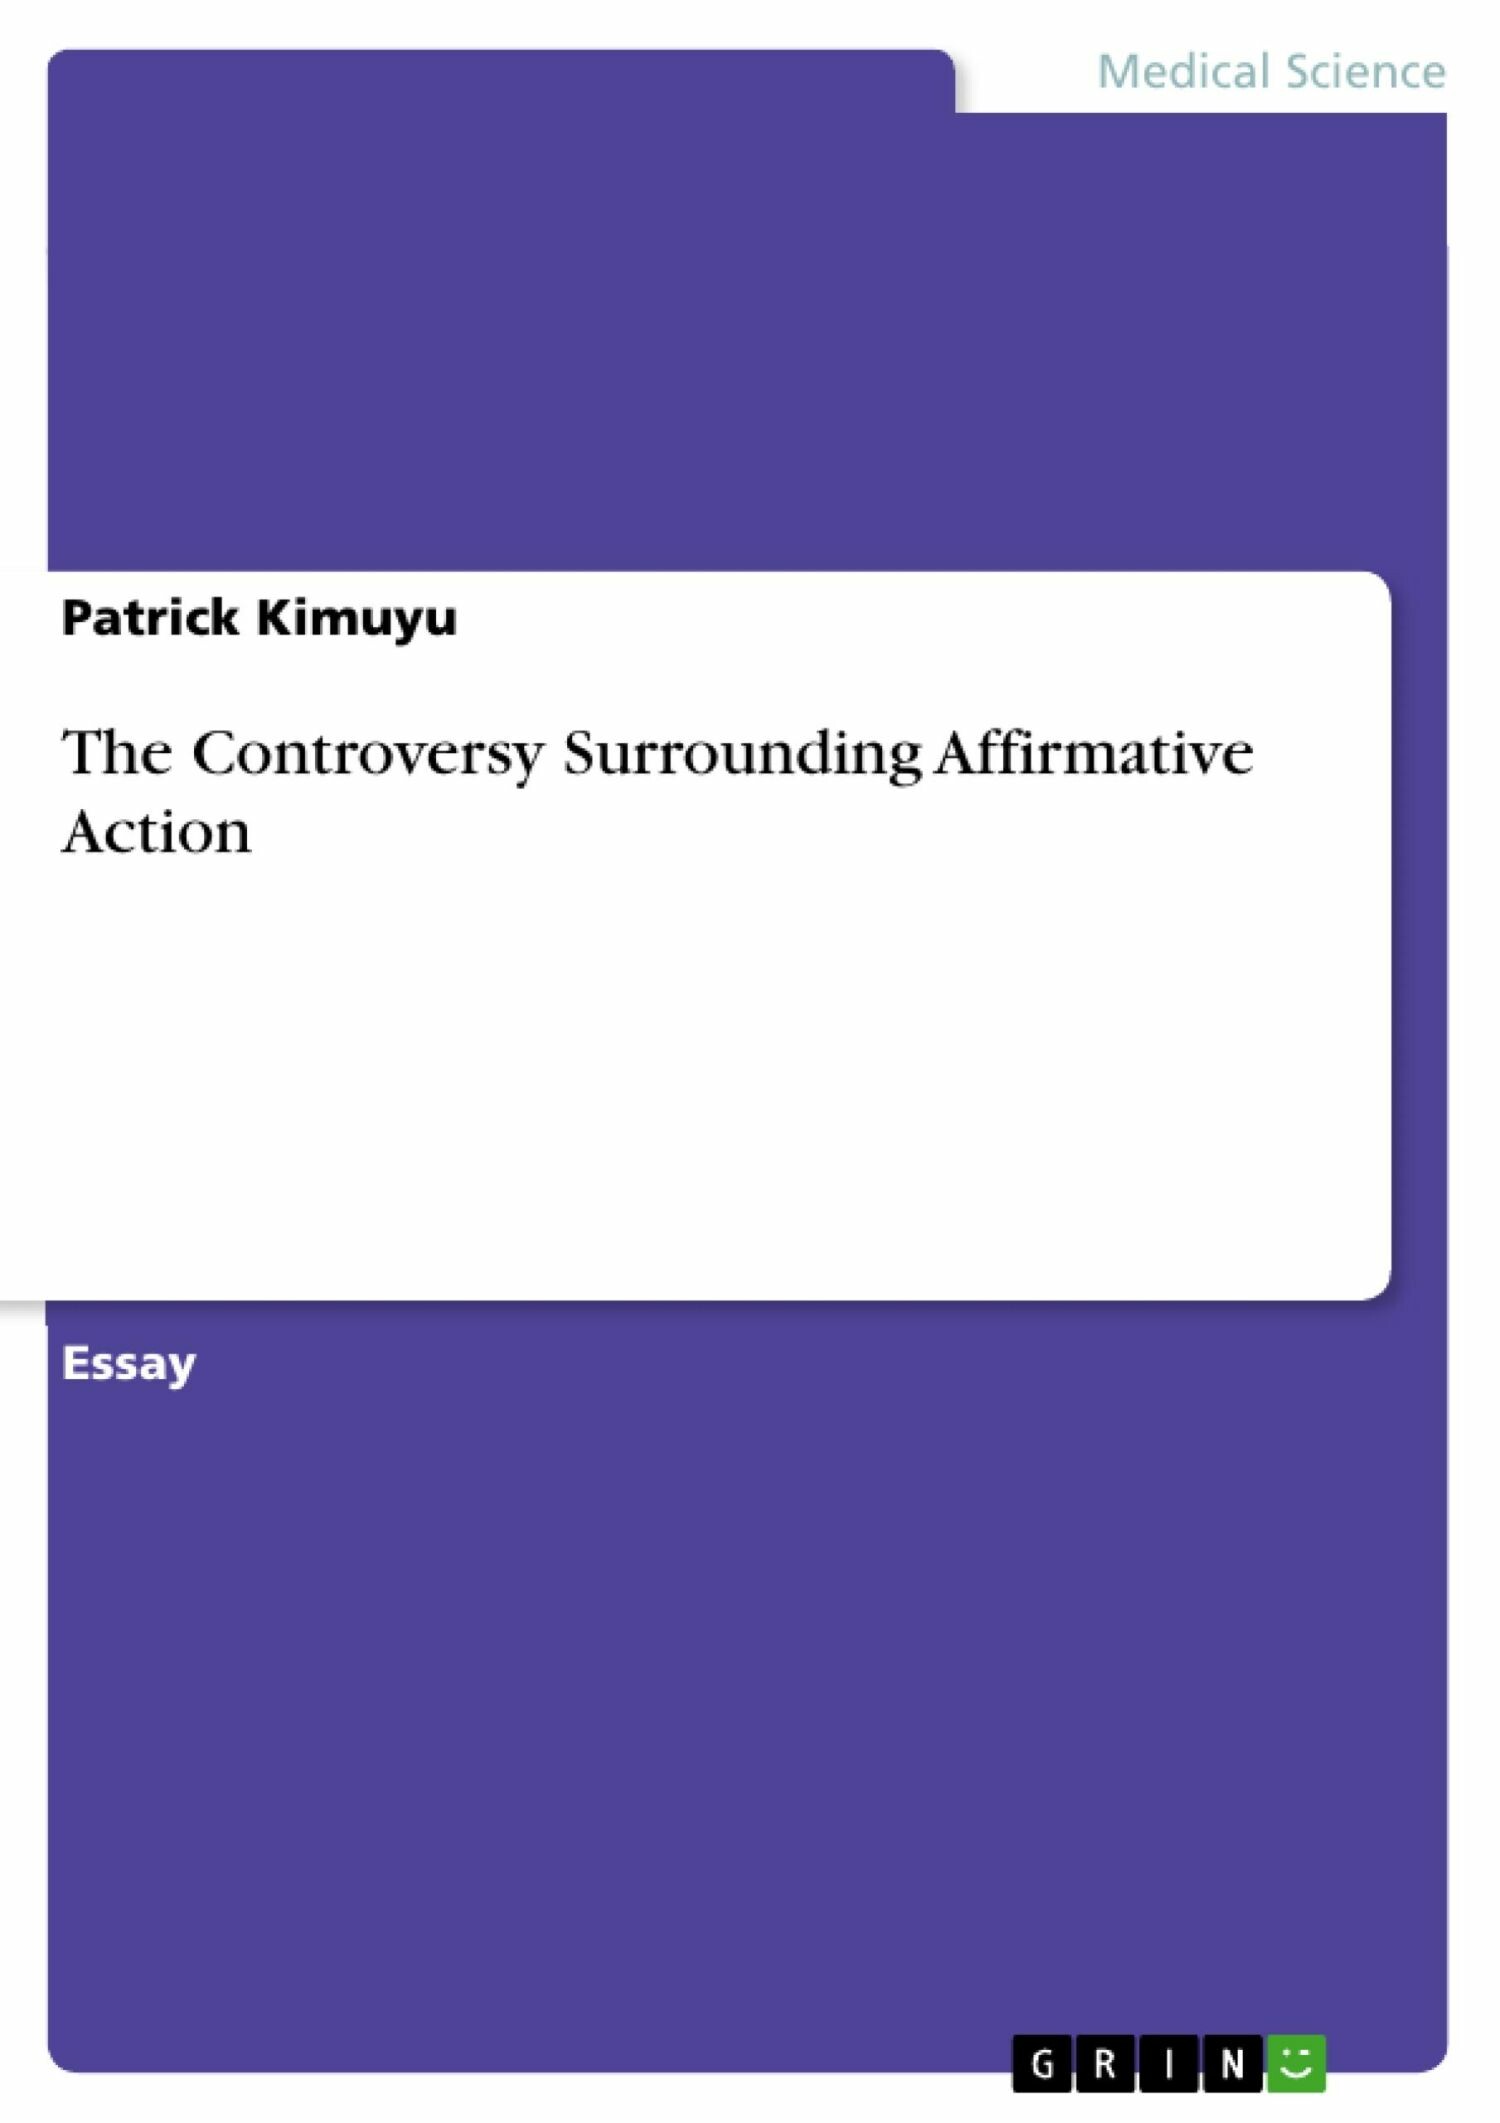 The Controversy Surrounding Affirmative Action